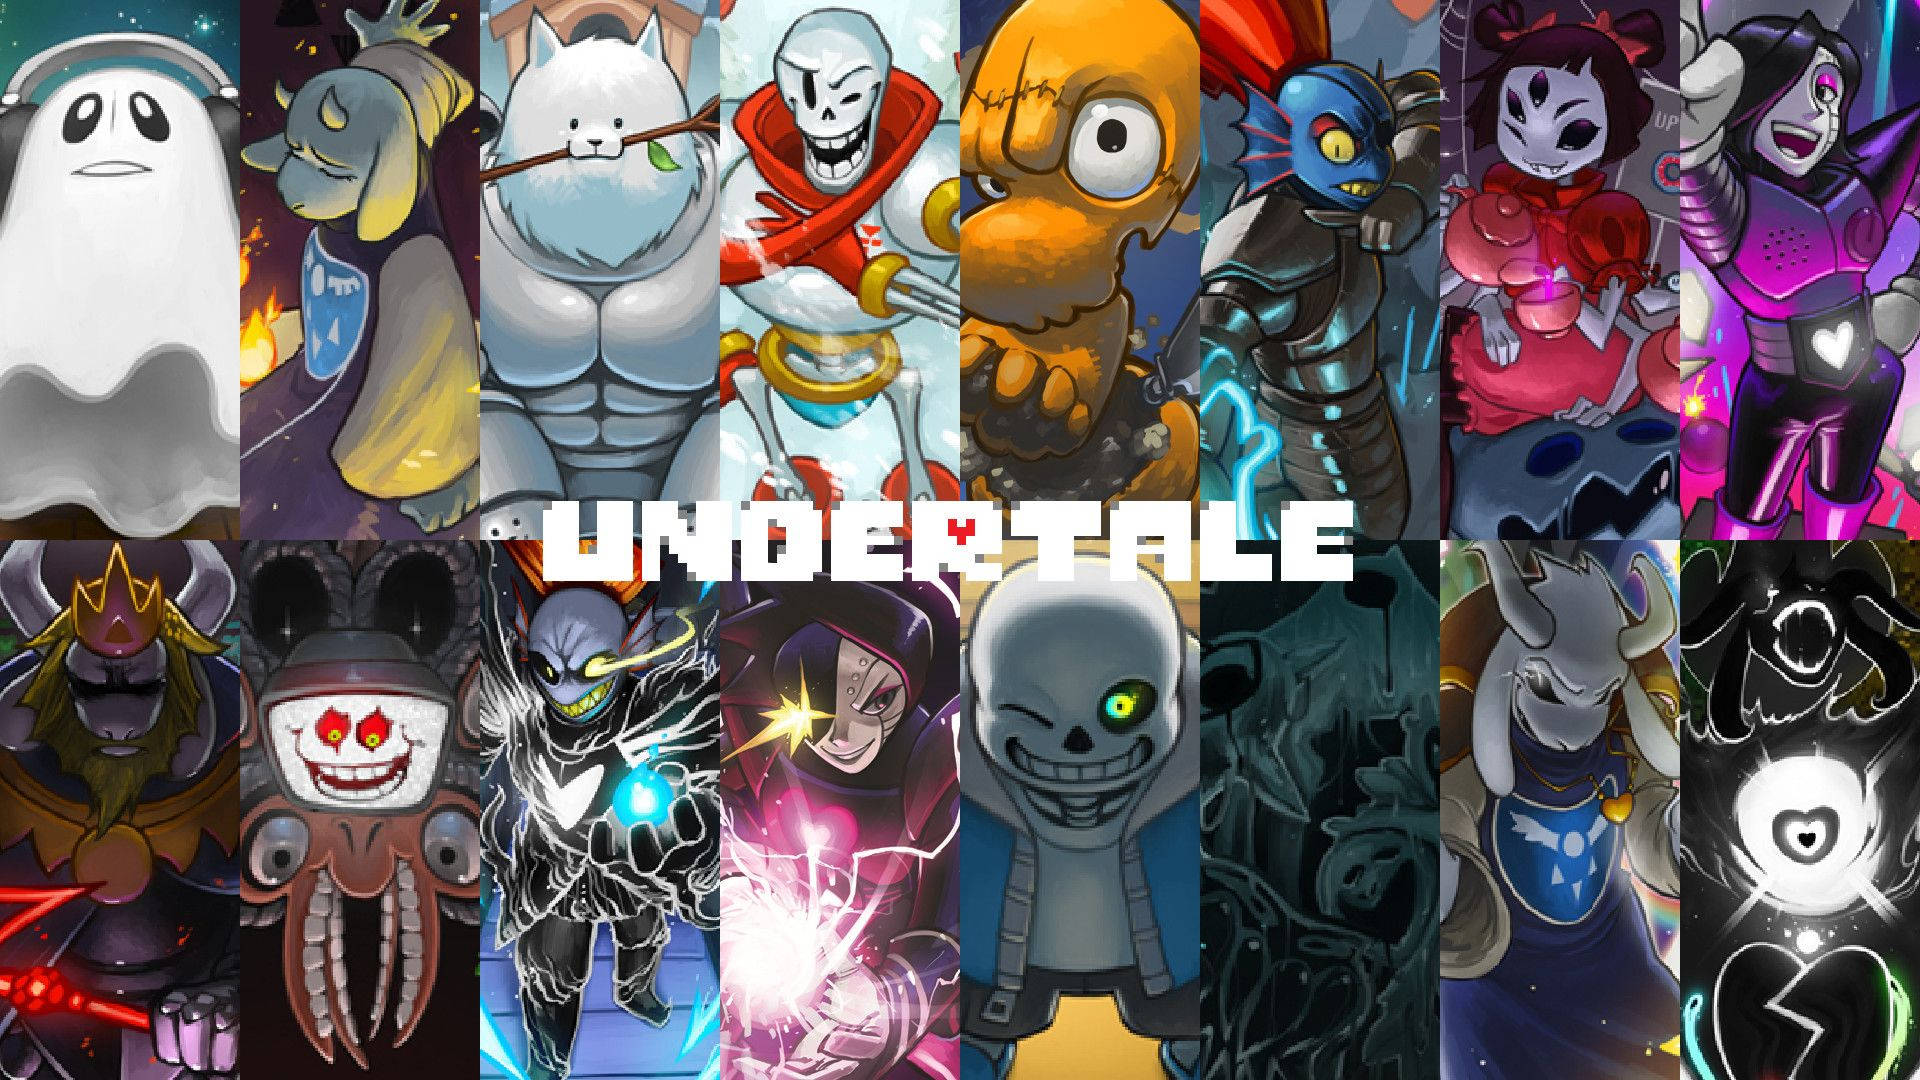 Undertale Characters in two row panels wallpaper.